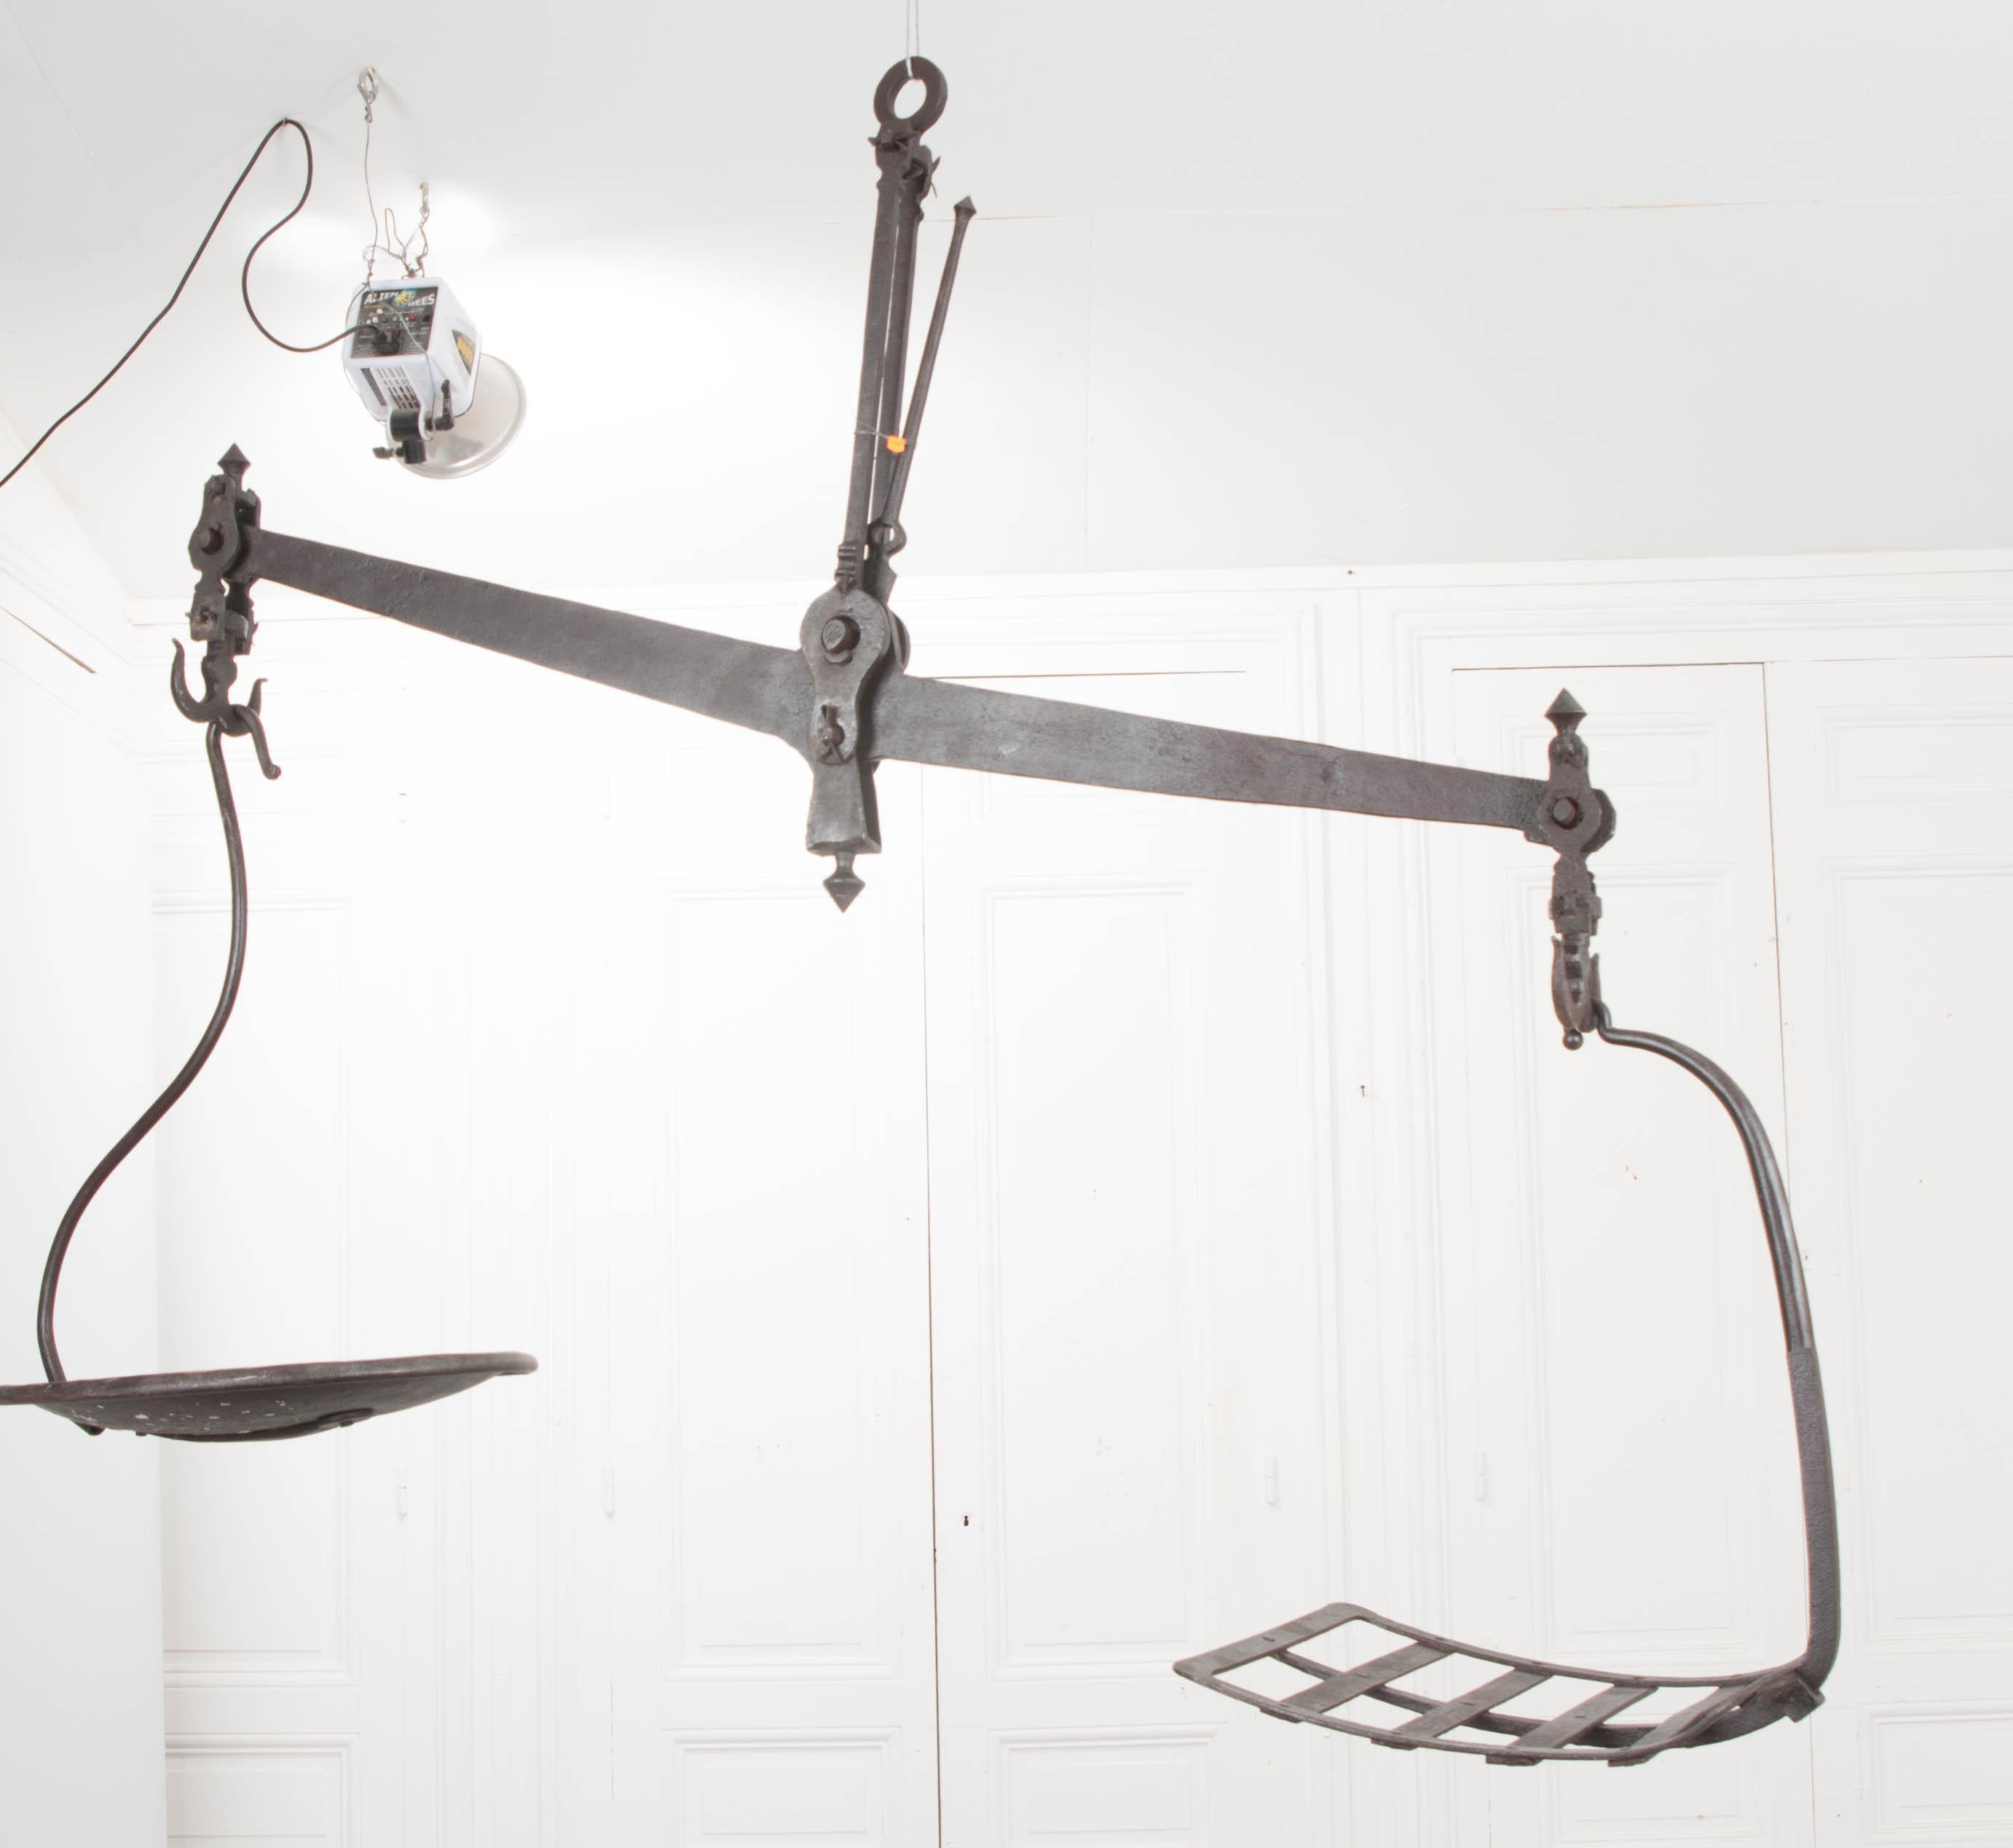 A massive 19th century hanging cast iron produce scale, circa 1860, from France which would have been used for weighing produce or meat in a warehouse or a large farmer's market. A series of weights would be place into the circular side while the